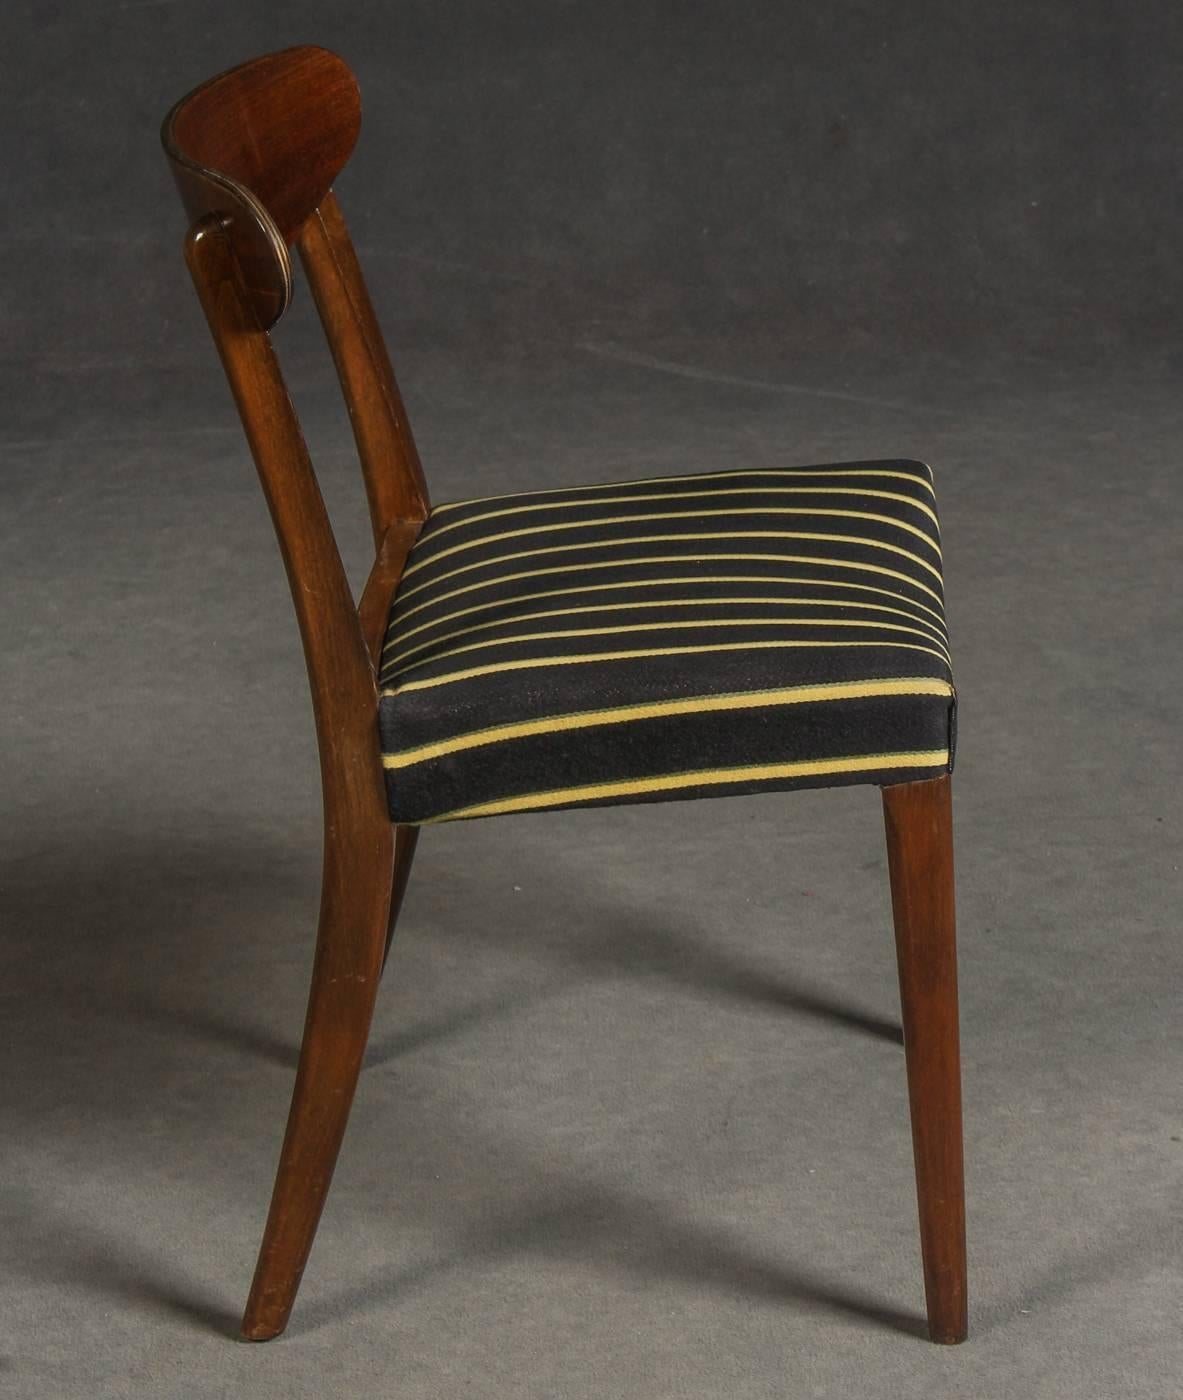 Dining chairs with curved backs crafted of teak, on oak frames. Attributed to Kai Lyngfeldt Larsen and made in the 1960s by Soren Willadsen. Original condition.